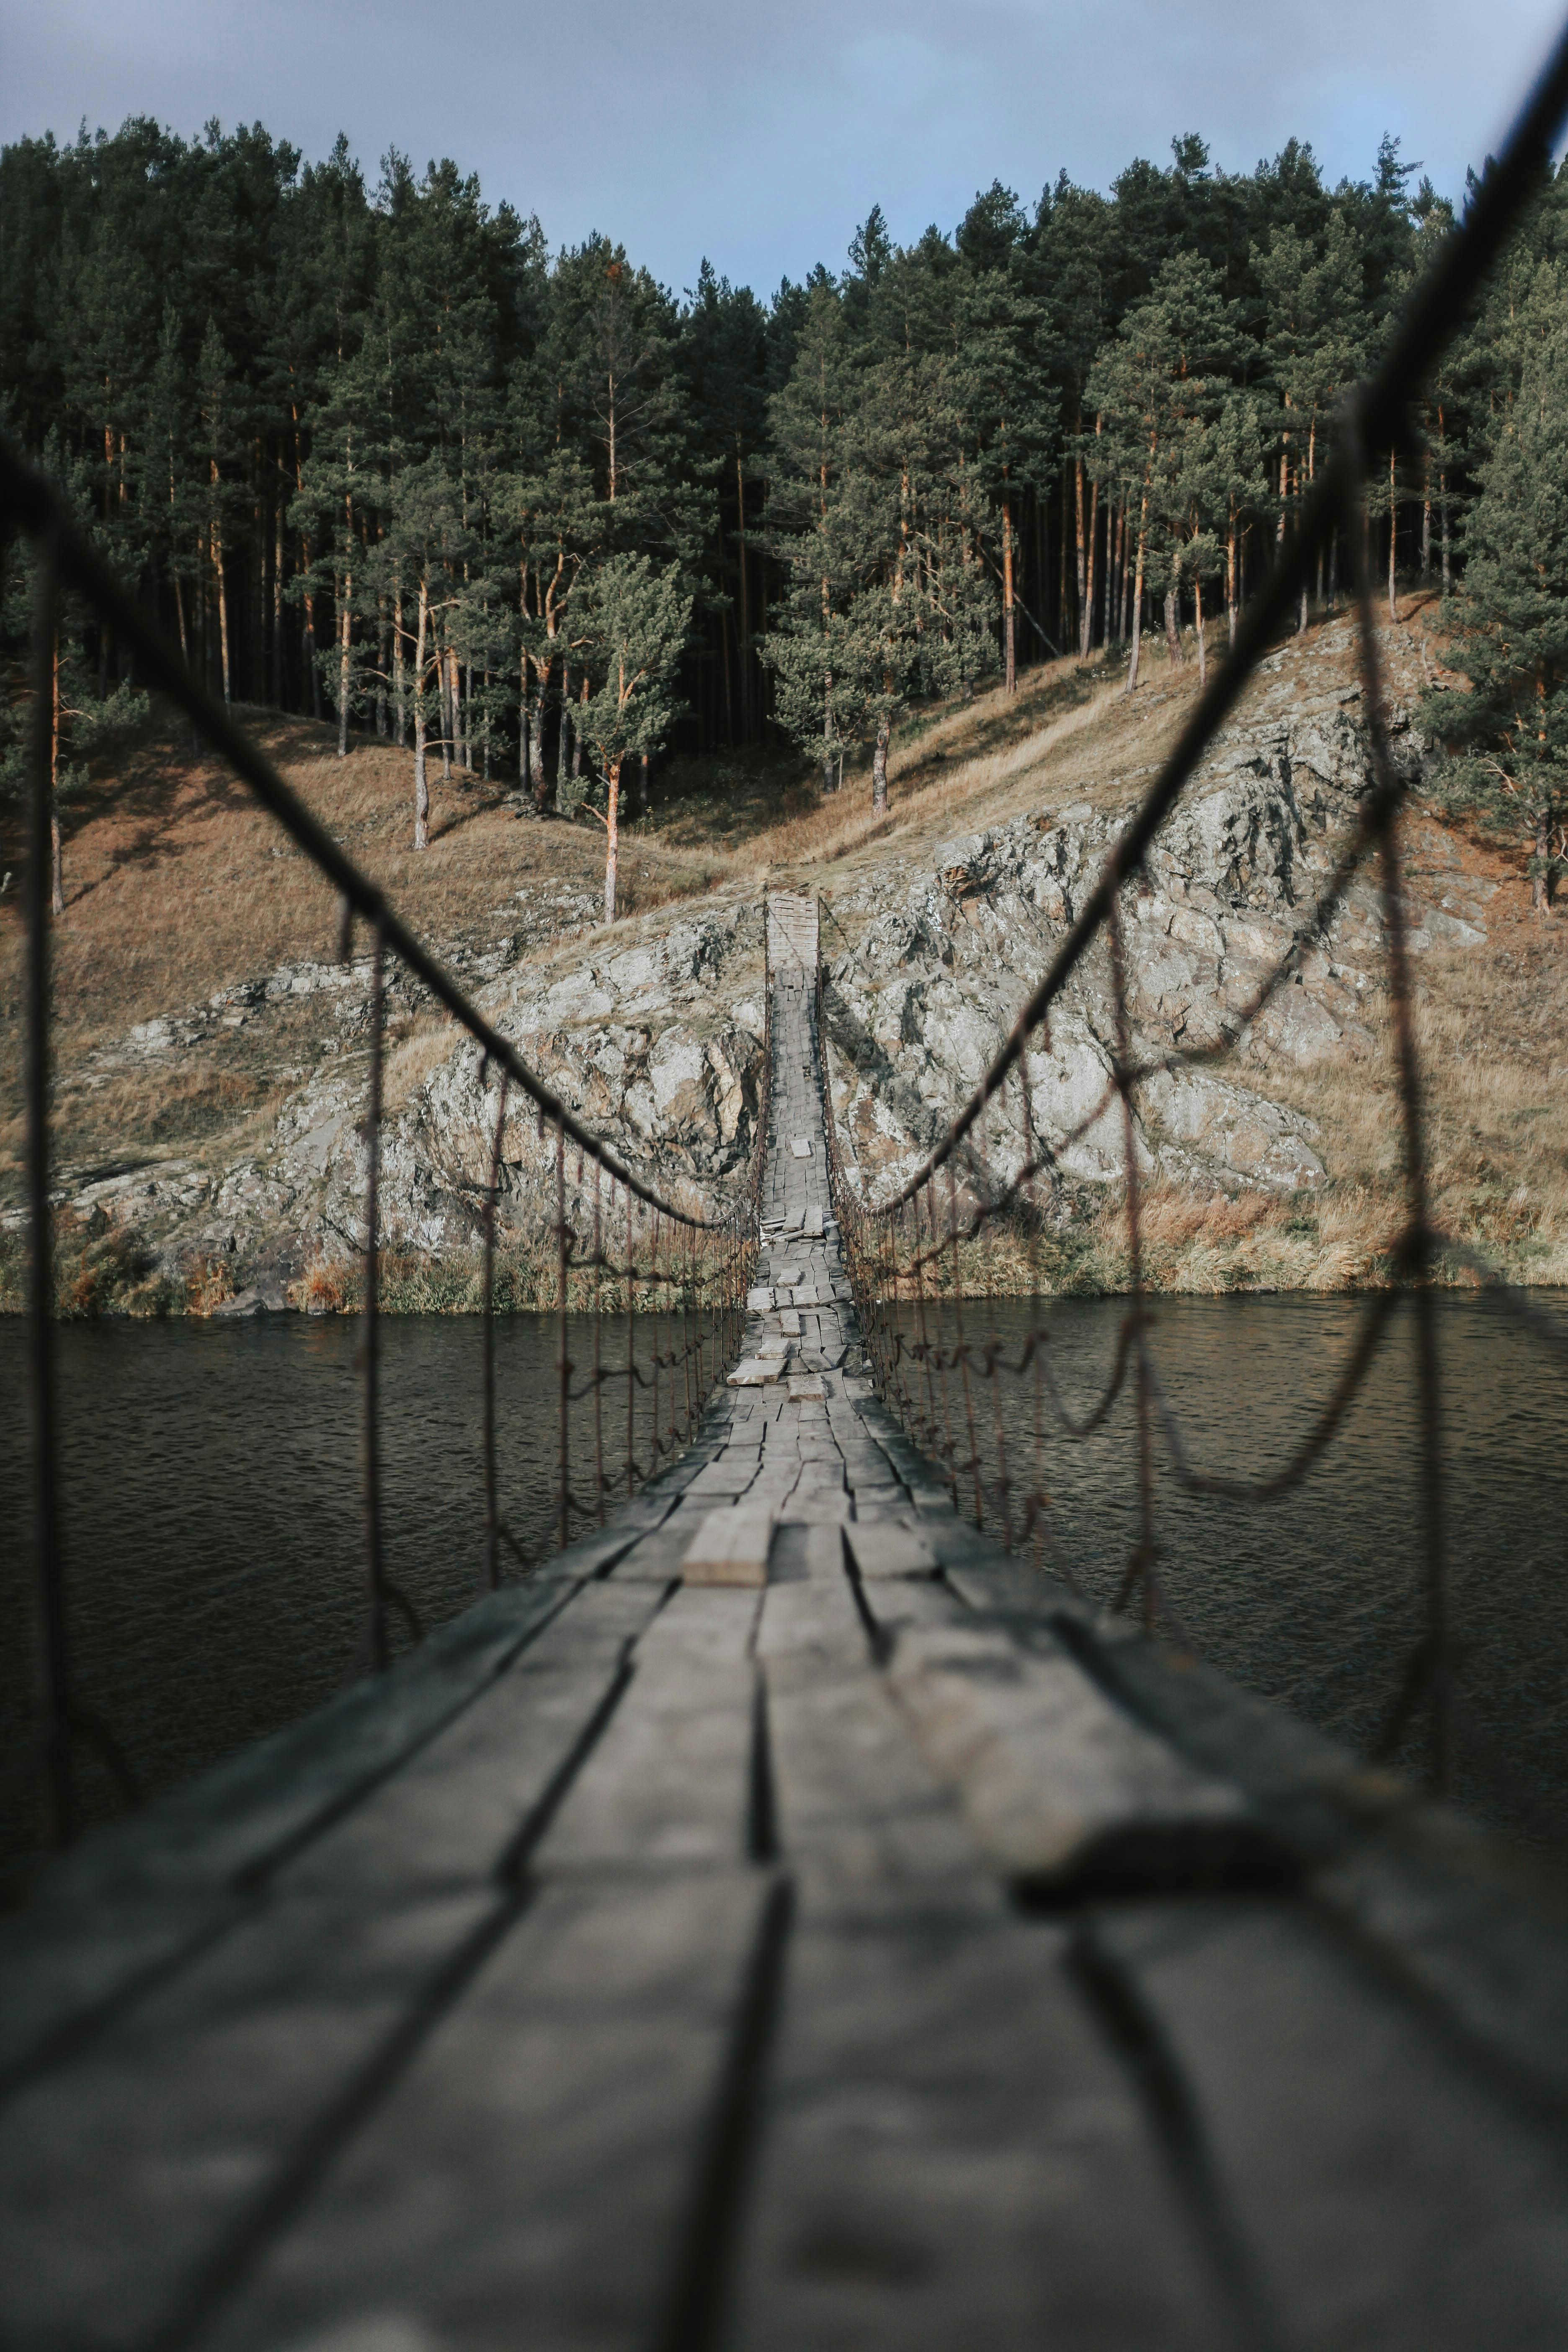 Alley Photography Of Brown Wooden Bridge · Free Stock Photo